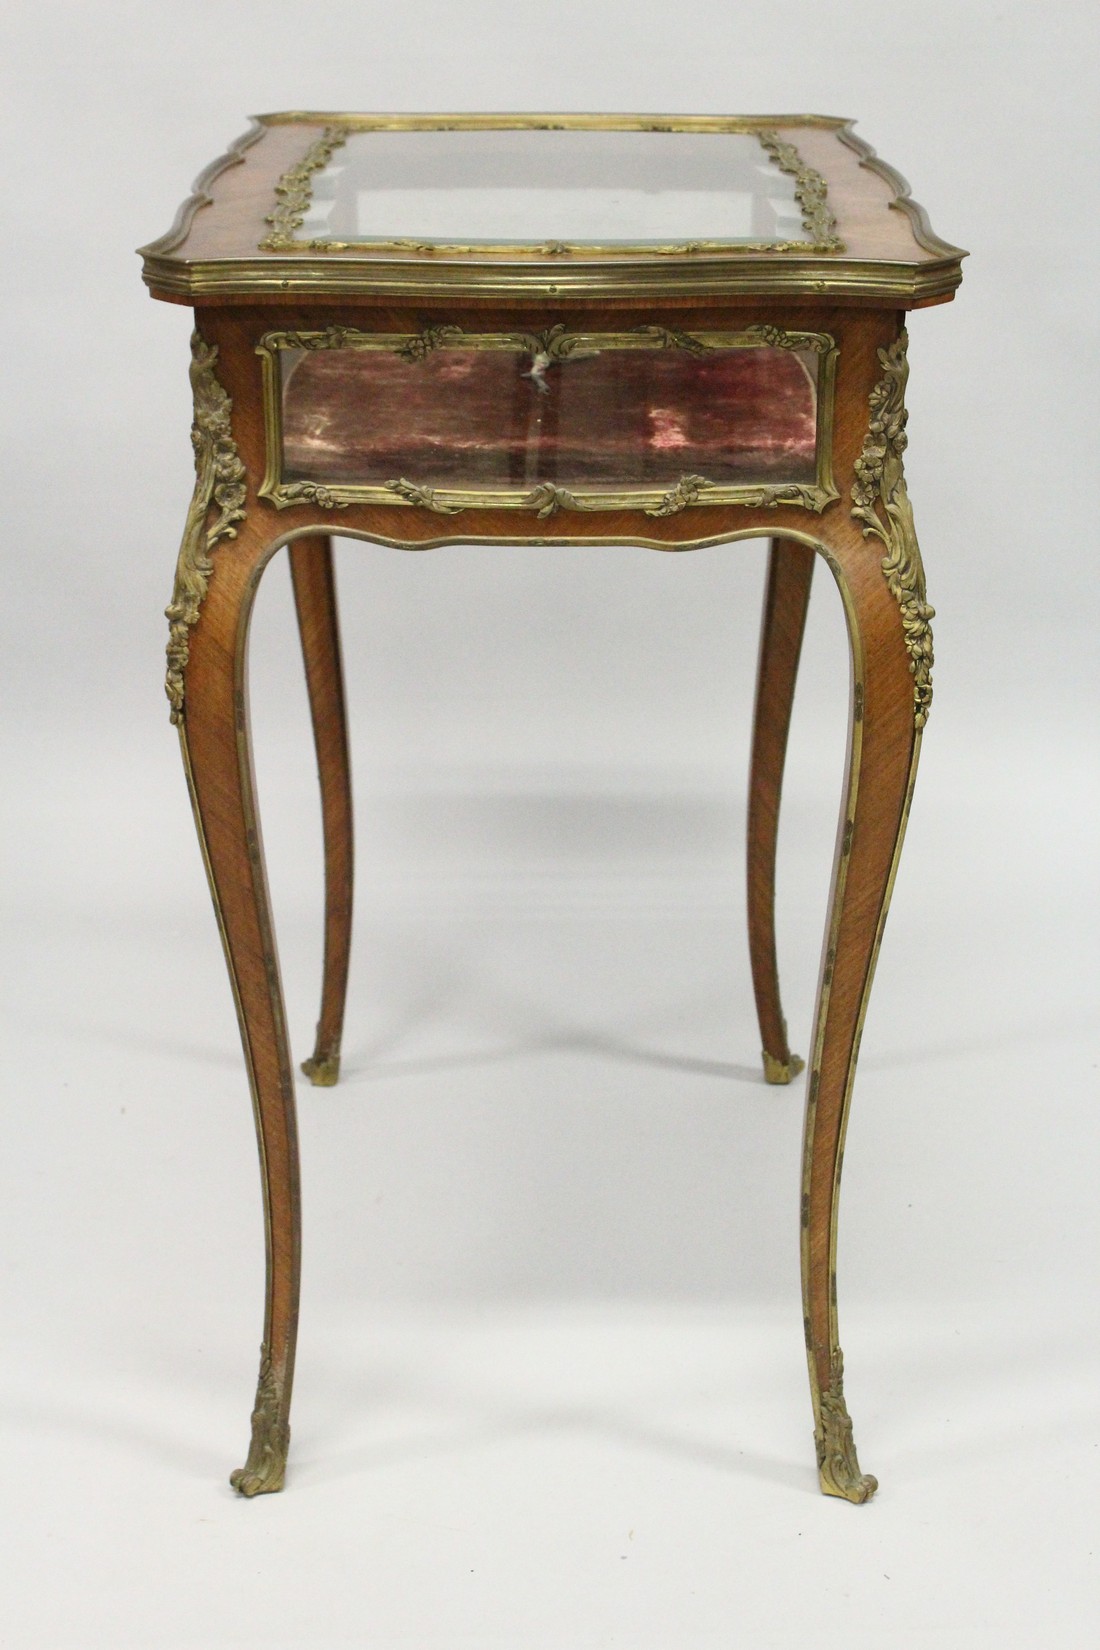 A GOOD 19TH CENTURY FRENCH ROSEWOOD BIJOUTERIE TABLE with ornate mounts, lift-up glazed top, glass - Image 11 of 11